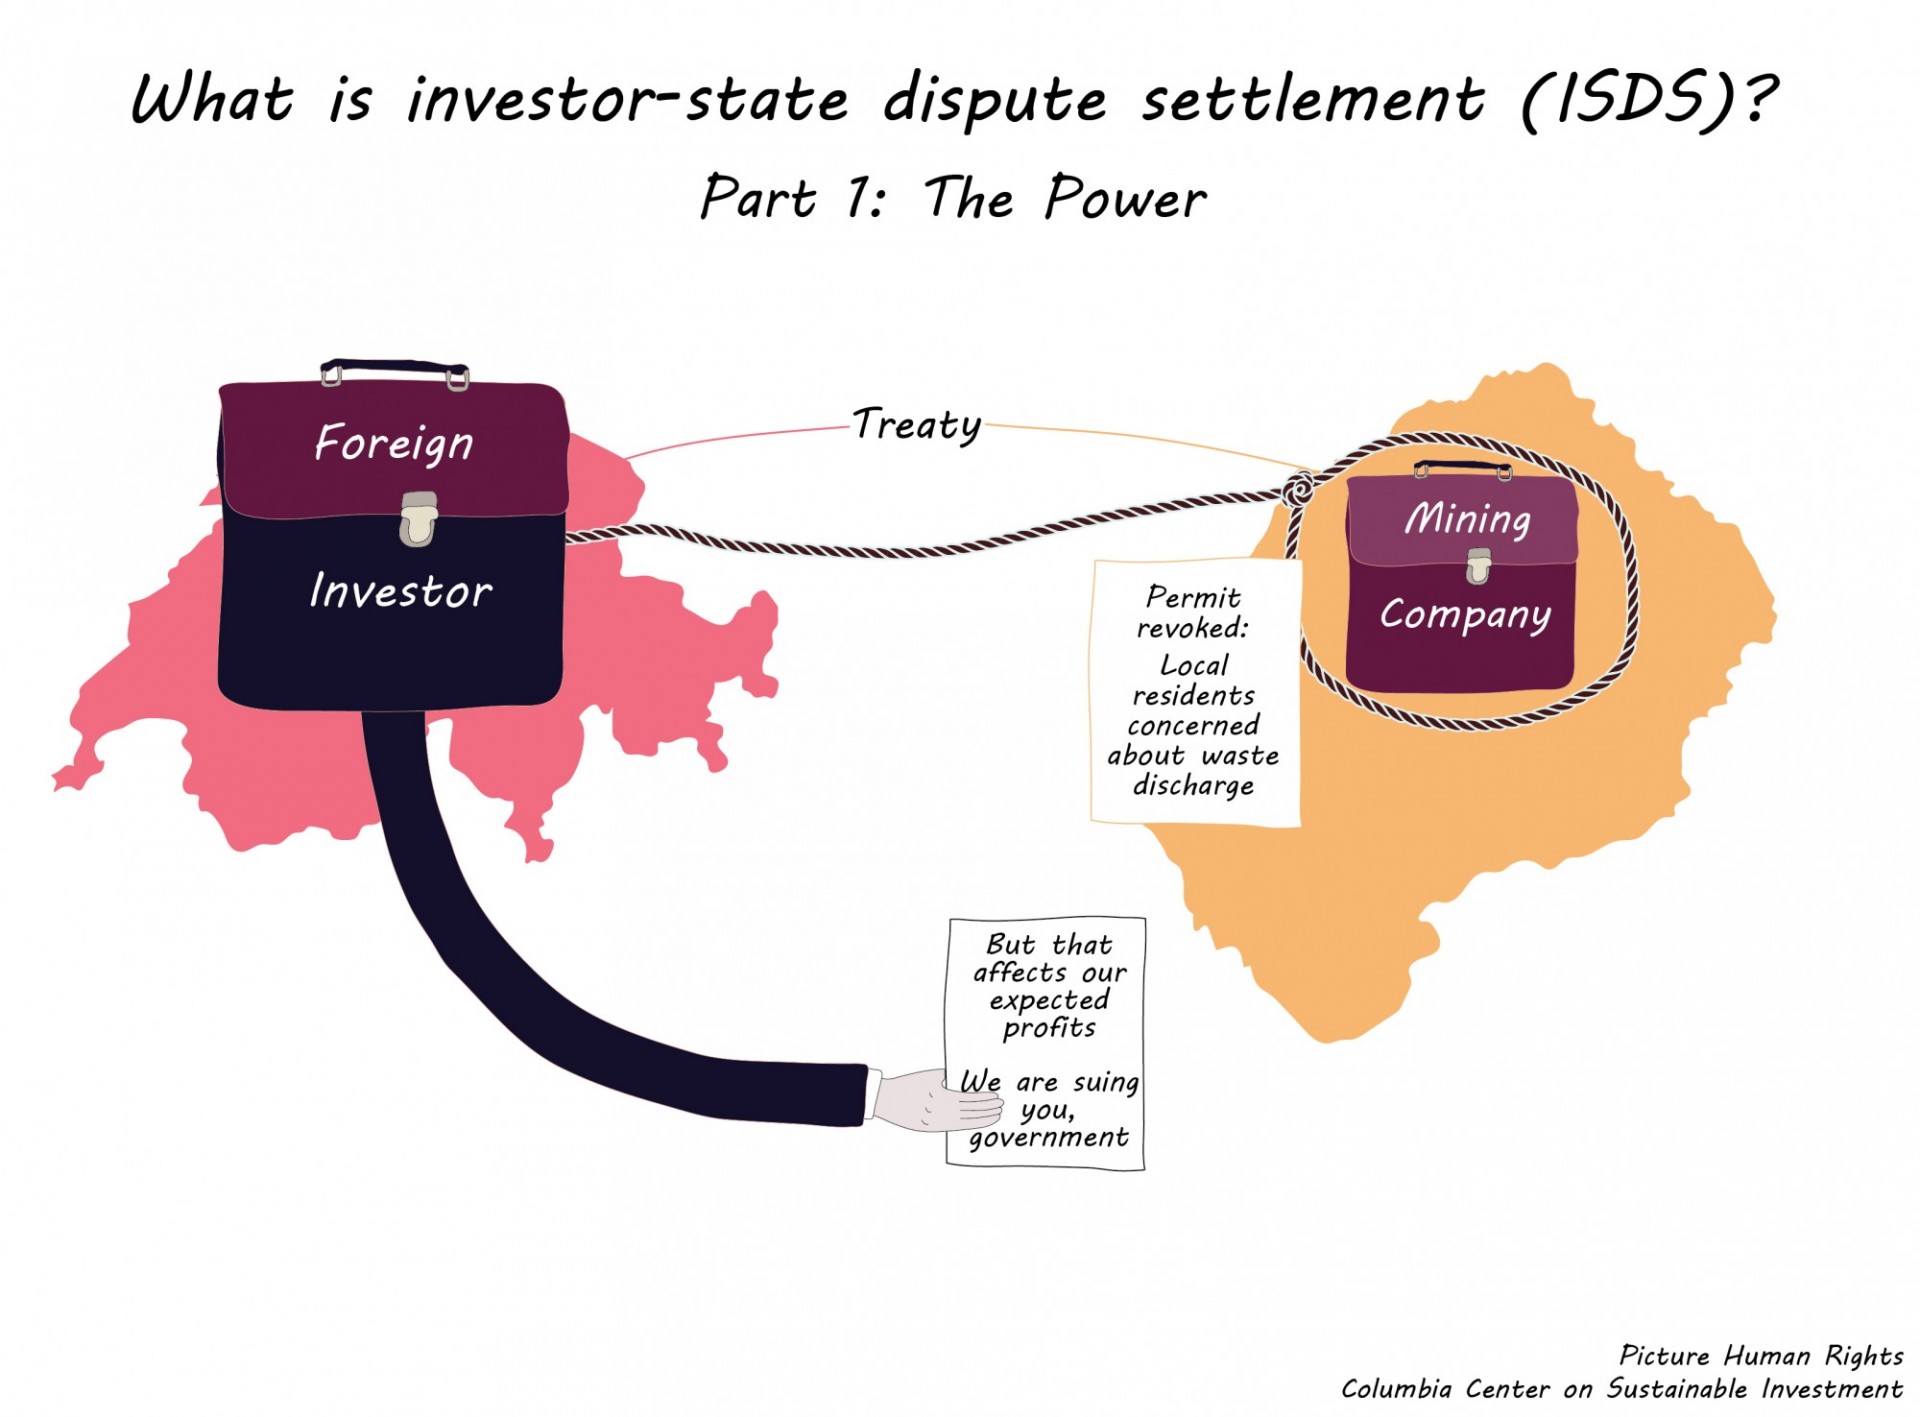 Graphic titled "What is investor-state dispute settlement (ISDS)? Part 1: The Power". The graphic depicts two countries on the left and right side. The country on the righthas a briefcase labeled "Mining Company" and it is held by a lasso titled "Treaty" from the first country. The country on the left has a briefcase labeled "Foreign Investor" with a hand extending towards the second country on the right holding a paper that reads "But that affects our expected profits. We are suing you, government." 